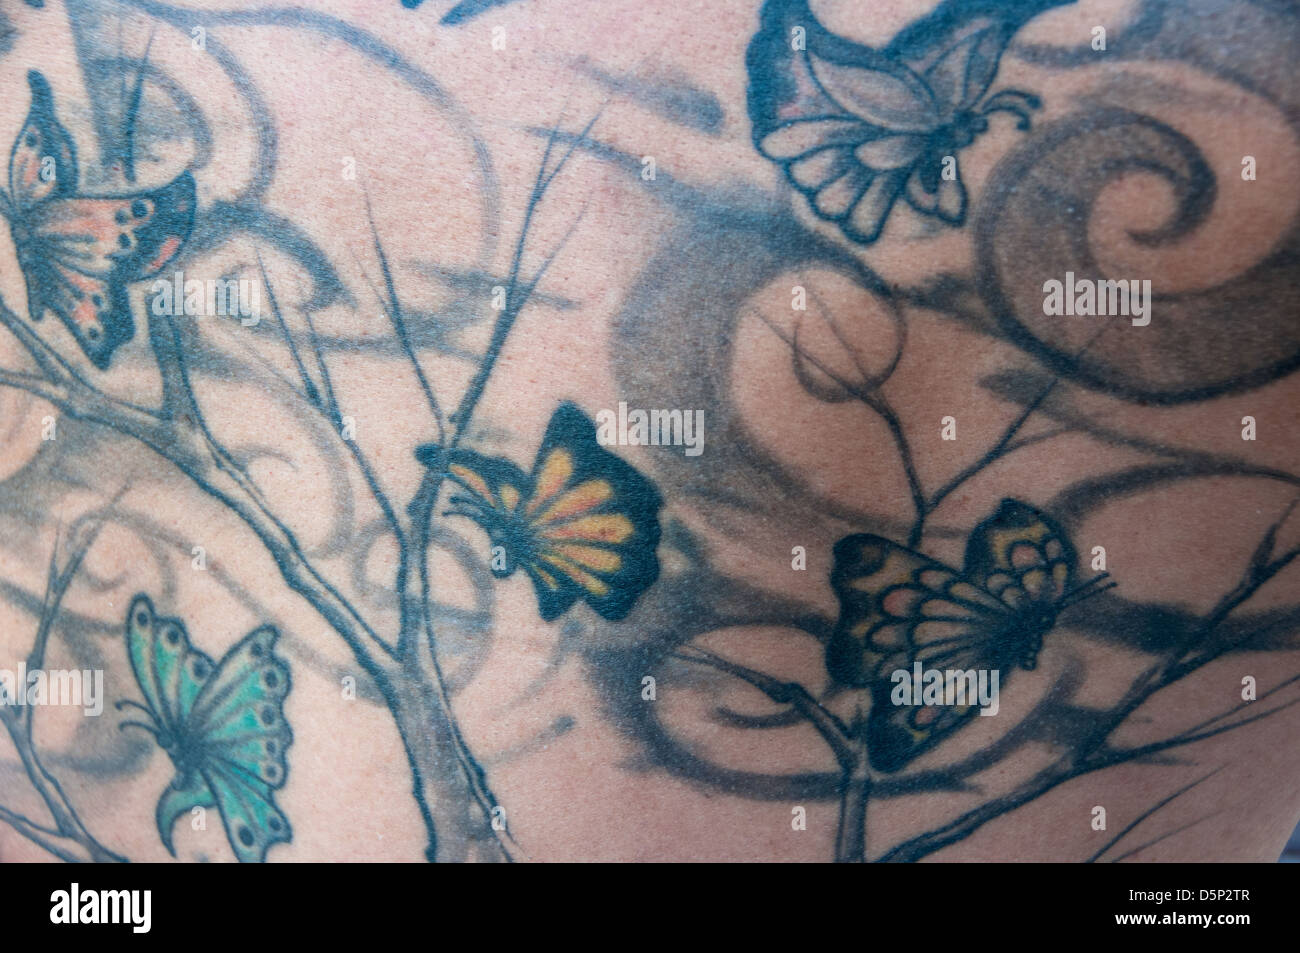 What To Know About The 90s Butterfly Tattoo Trend  Flipboard